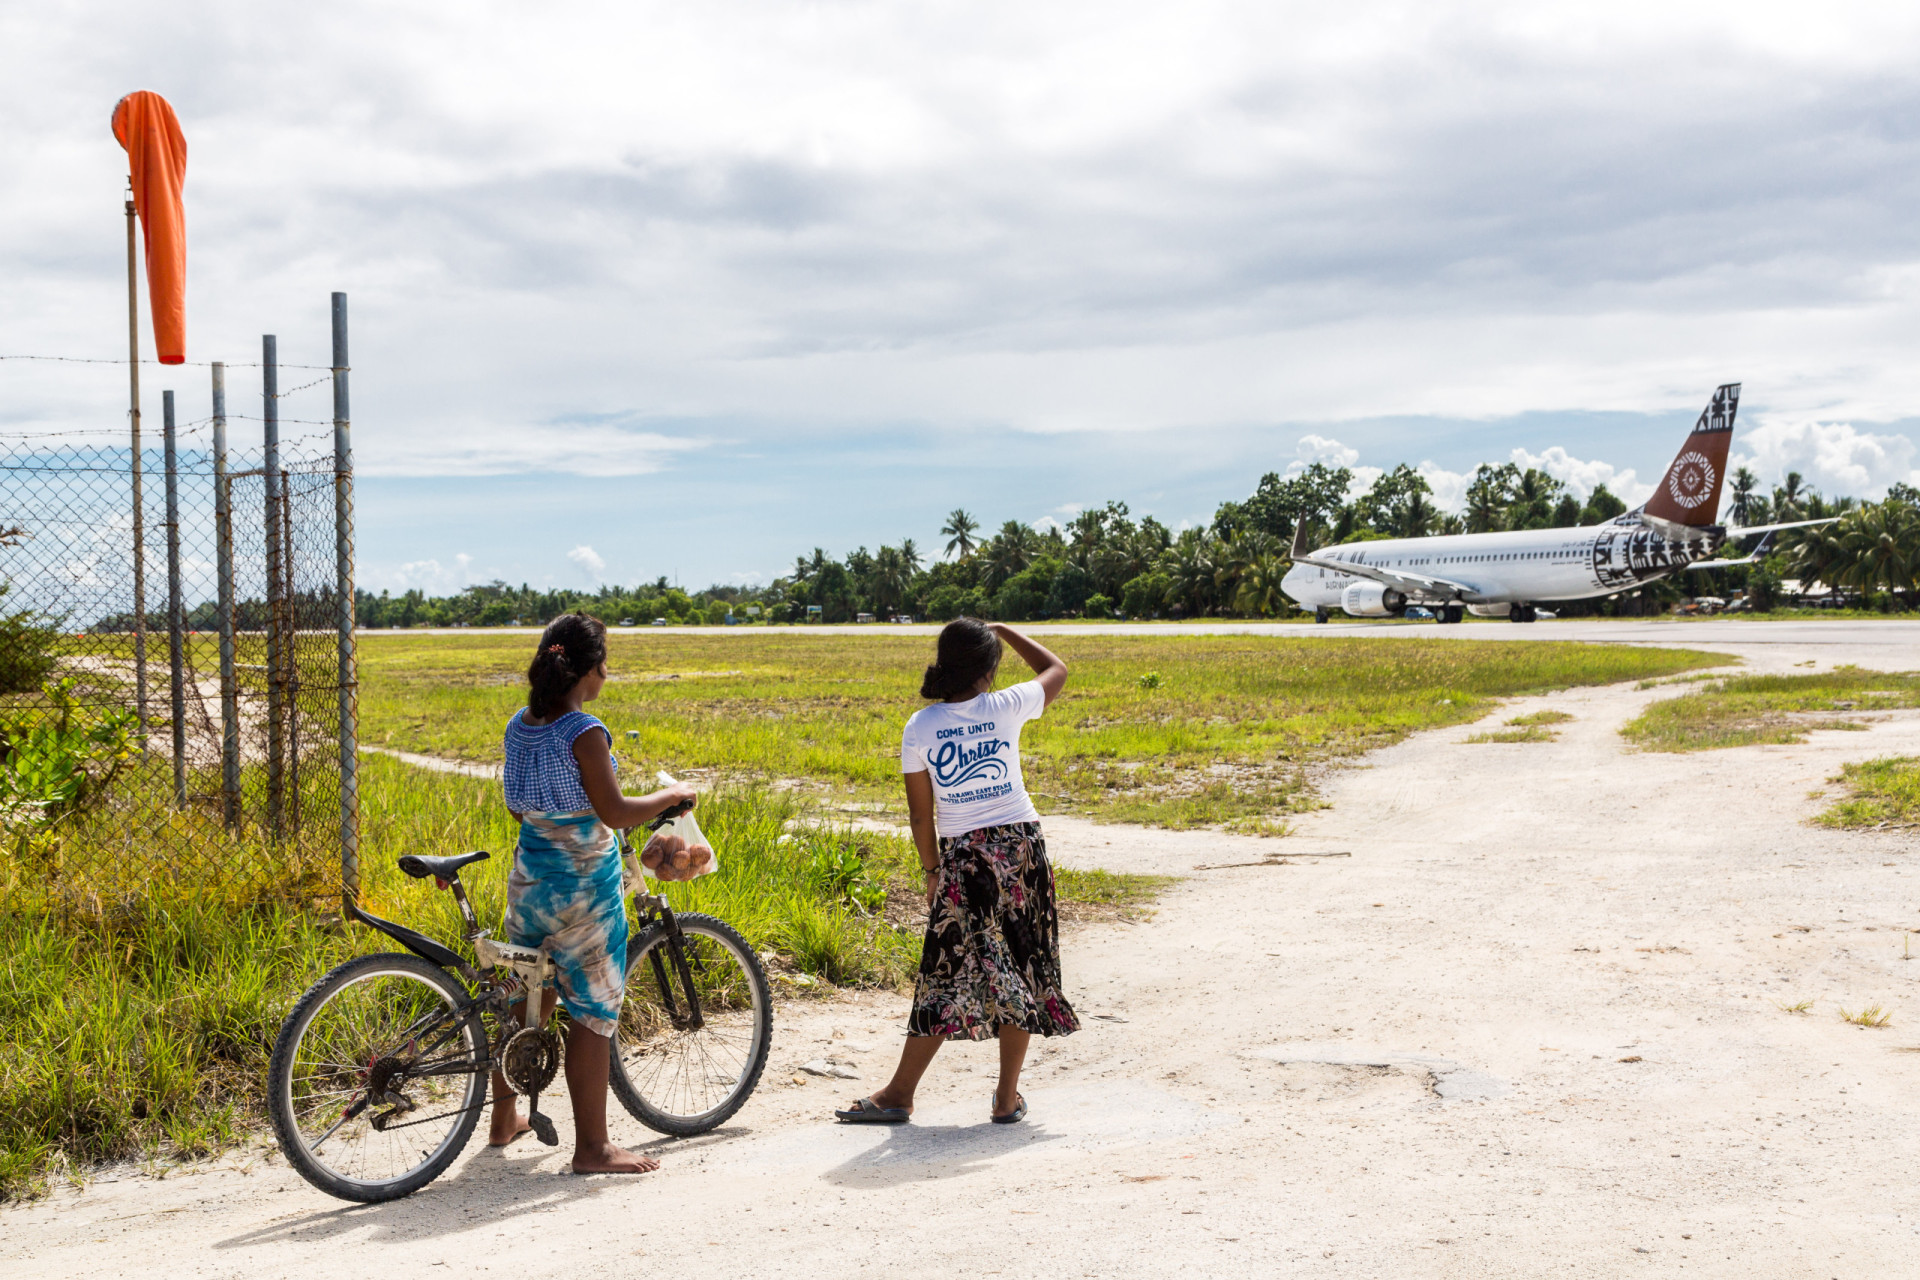 <p>Many people migrate from Kiribati for better opportunities, particularly to New Zealand and Australia. With their migration, they often send remittances back home, which support the local economy.</p><p><a href="https://www.msn.com/en-us/community/channel/vid-7xx8mnucu55yw63we9va2gwr7uihbxwc68fxqp25x6tg4ftibpra?cvid=94631541bc0f4f89bfd59158d696ad7e">Follow us and access great exclusive content every day</a></p>